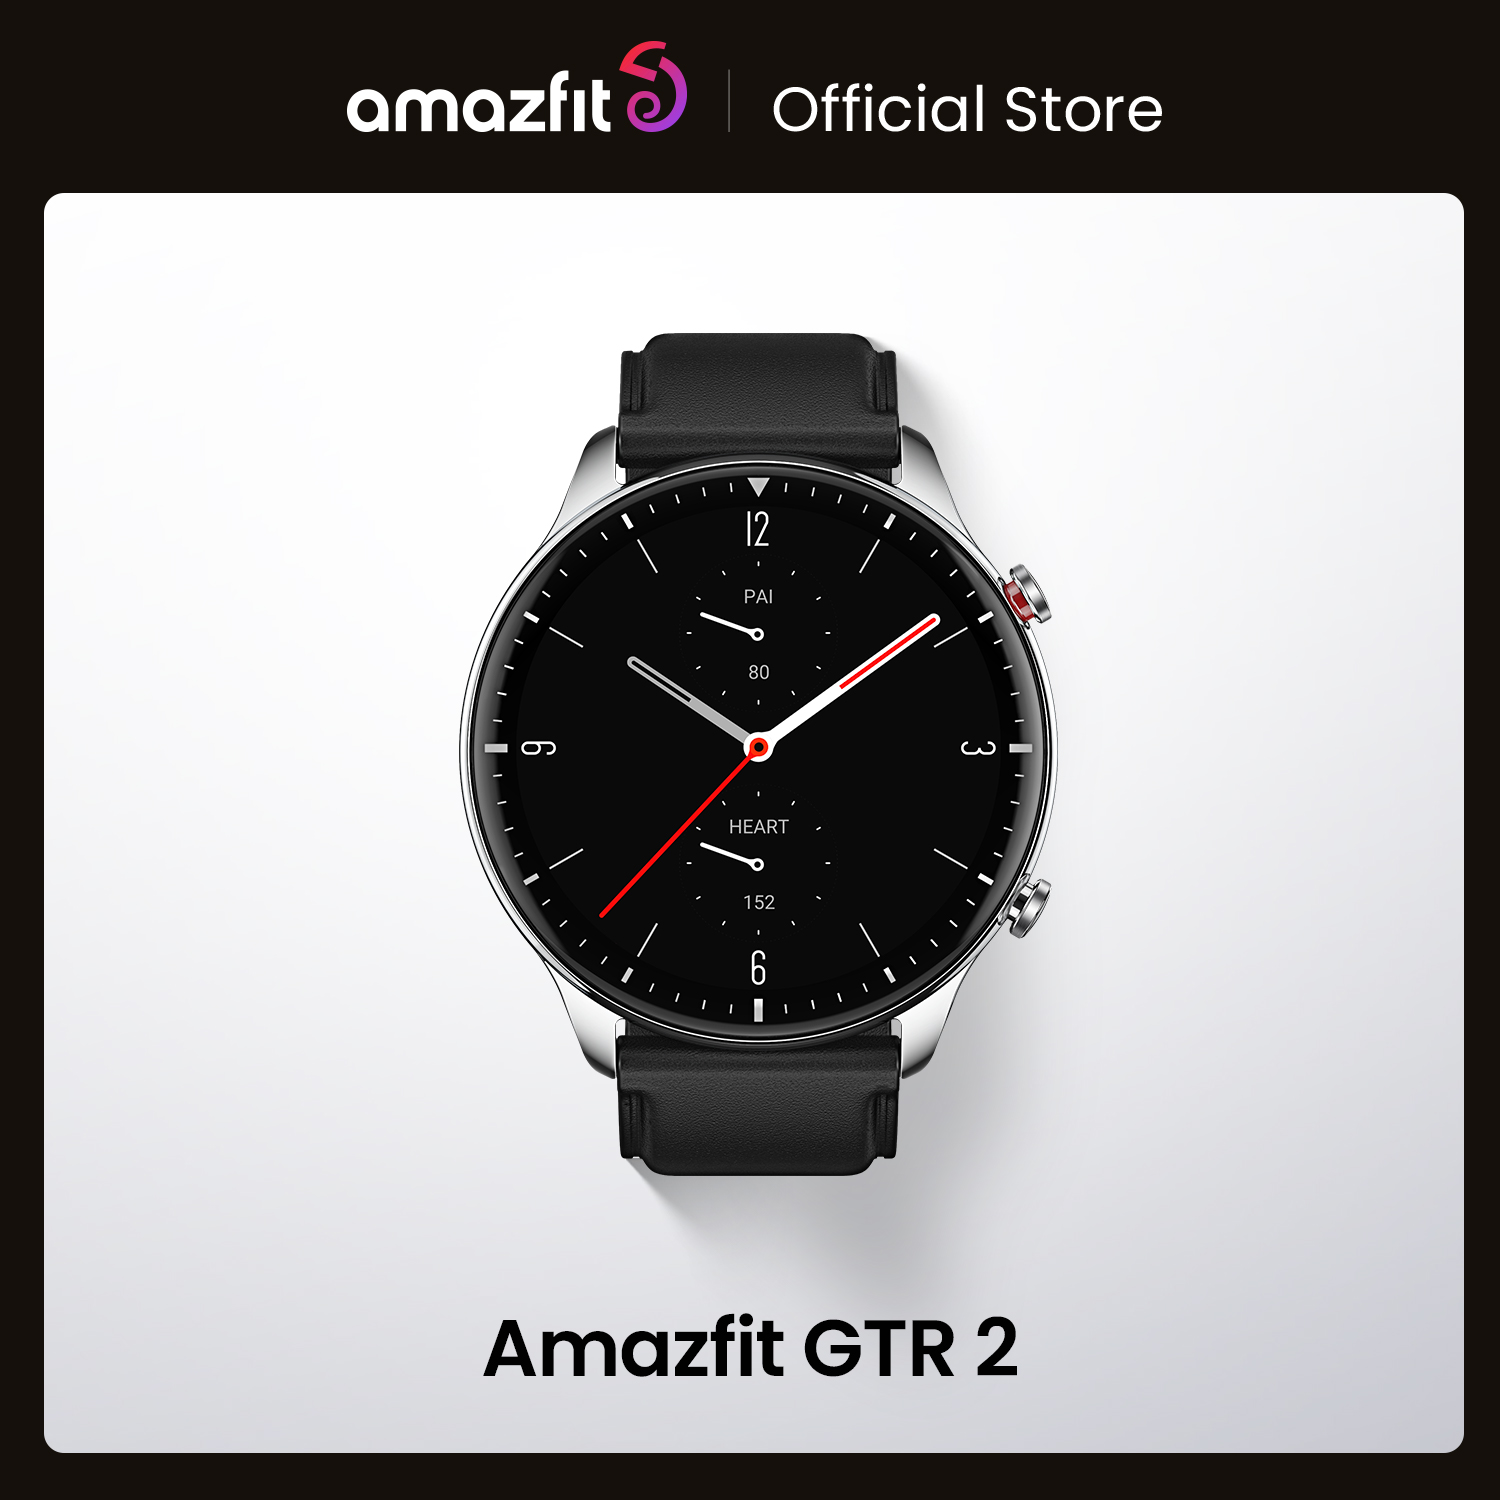 

New Amazfit GTR 2 Smartwatch 14 Days Battery Life Alexa Built-in Time Control Sleep Monitoring Smart Watch For Android iOS Phone, Aluminium alloy